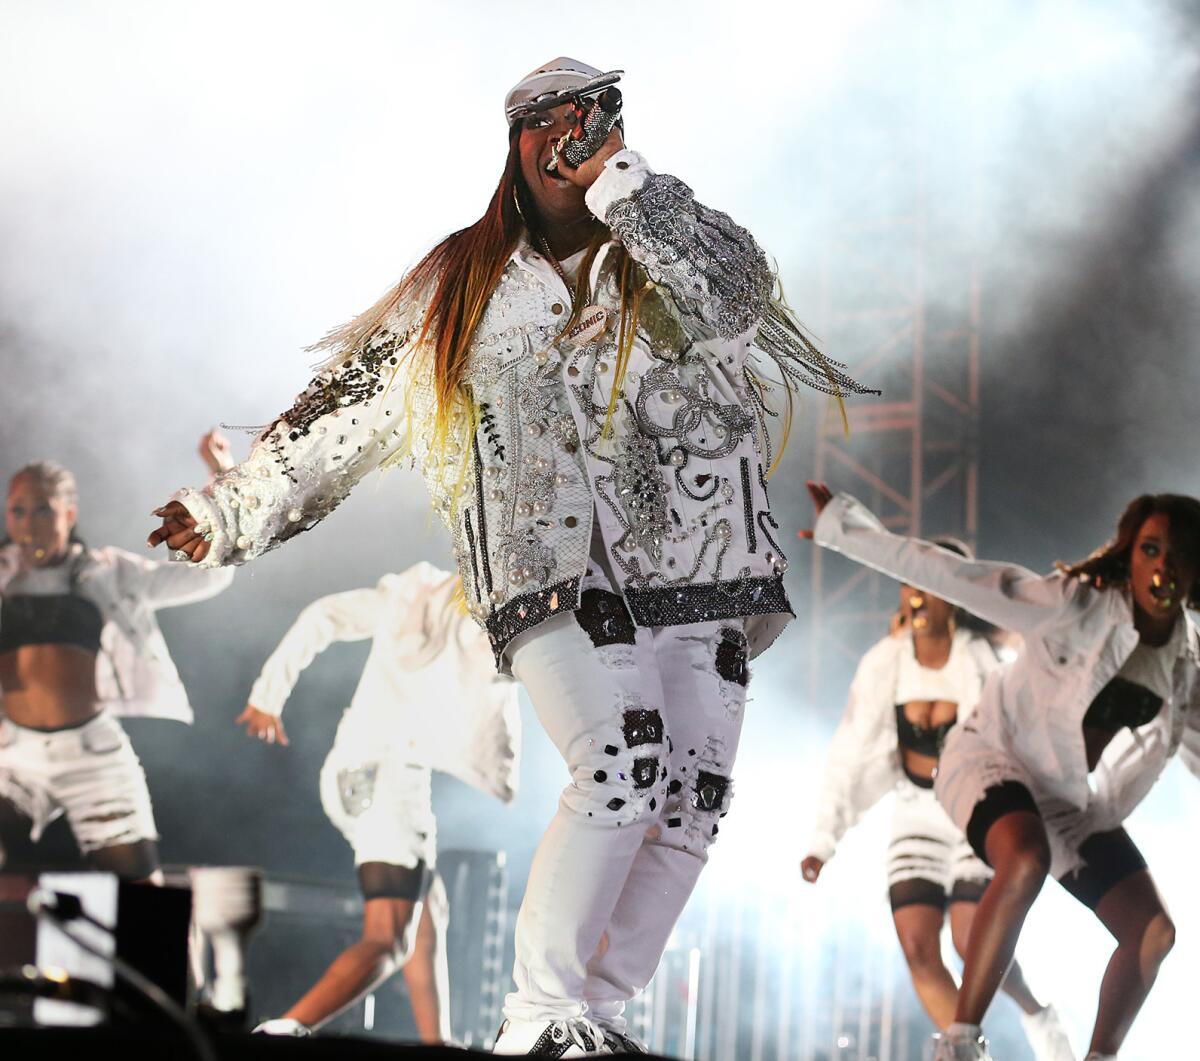 Missy Elliott performs at the FYF Fest at Exposition Park. (Robert Gauthier / Los Angeles Times)